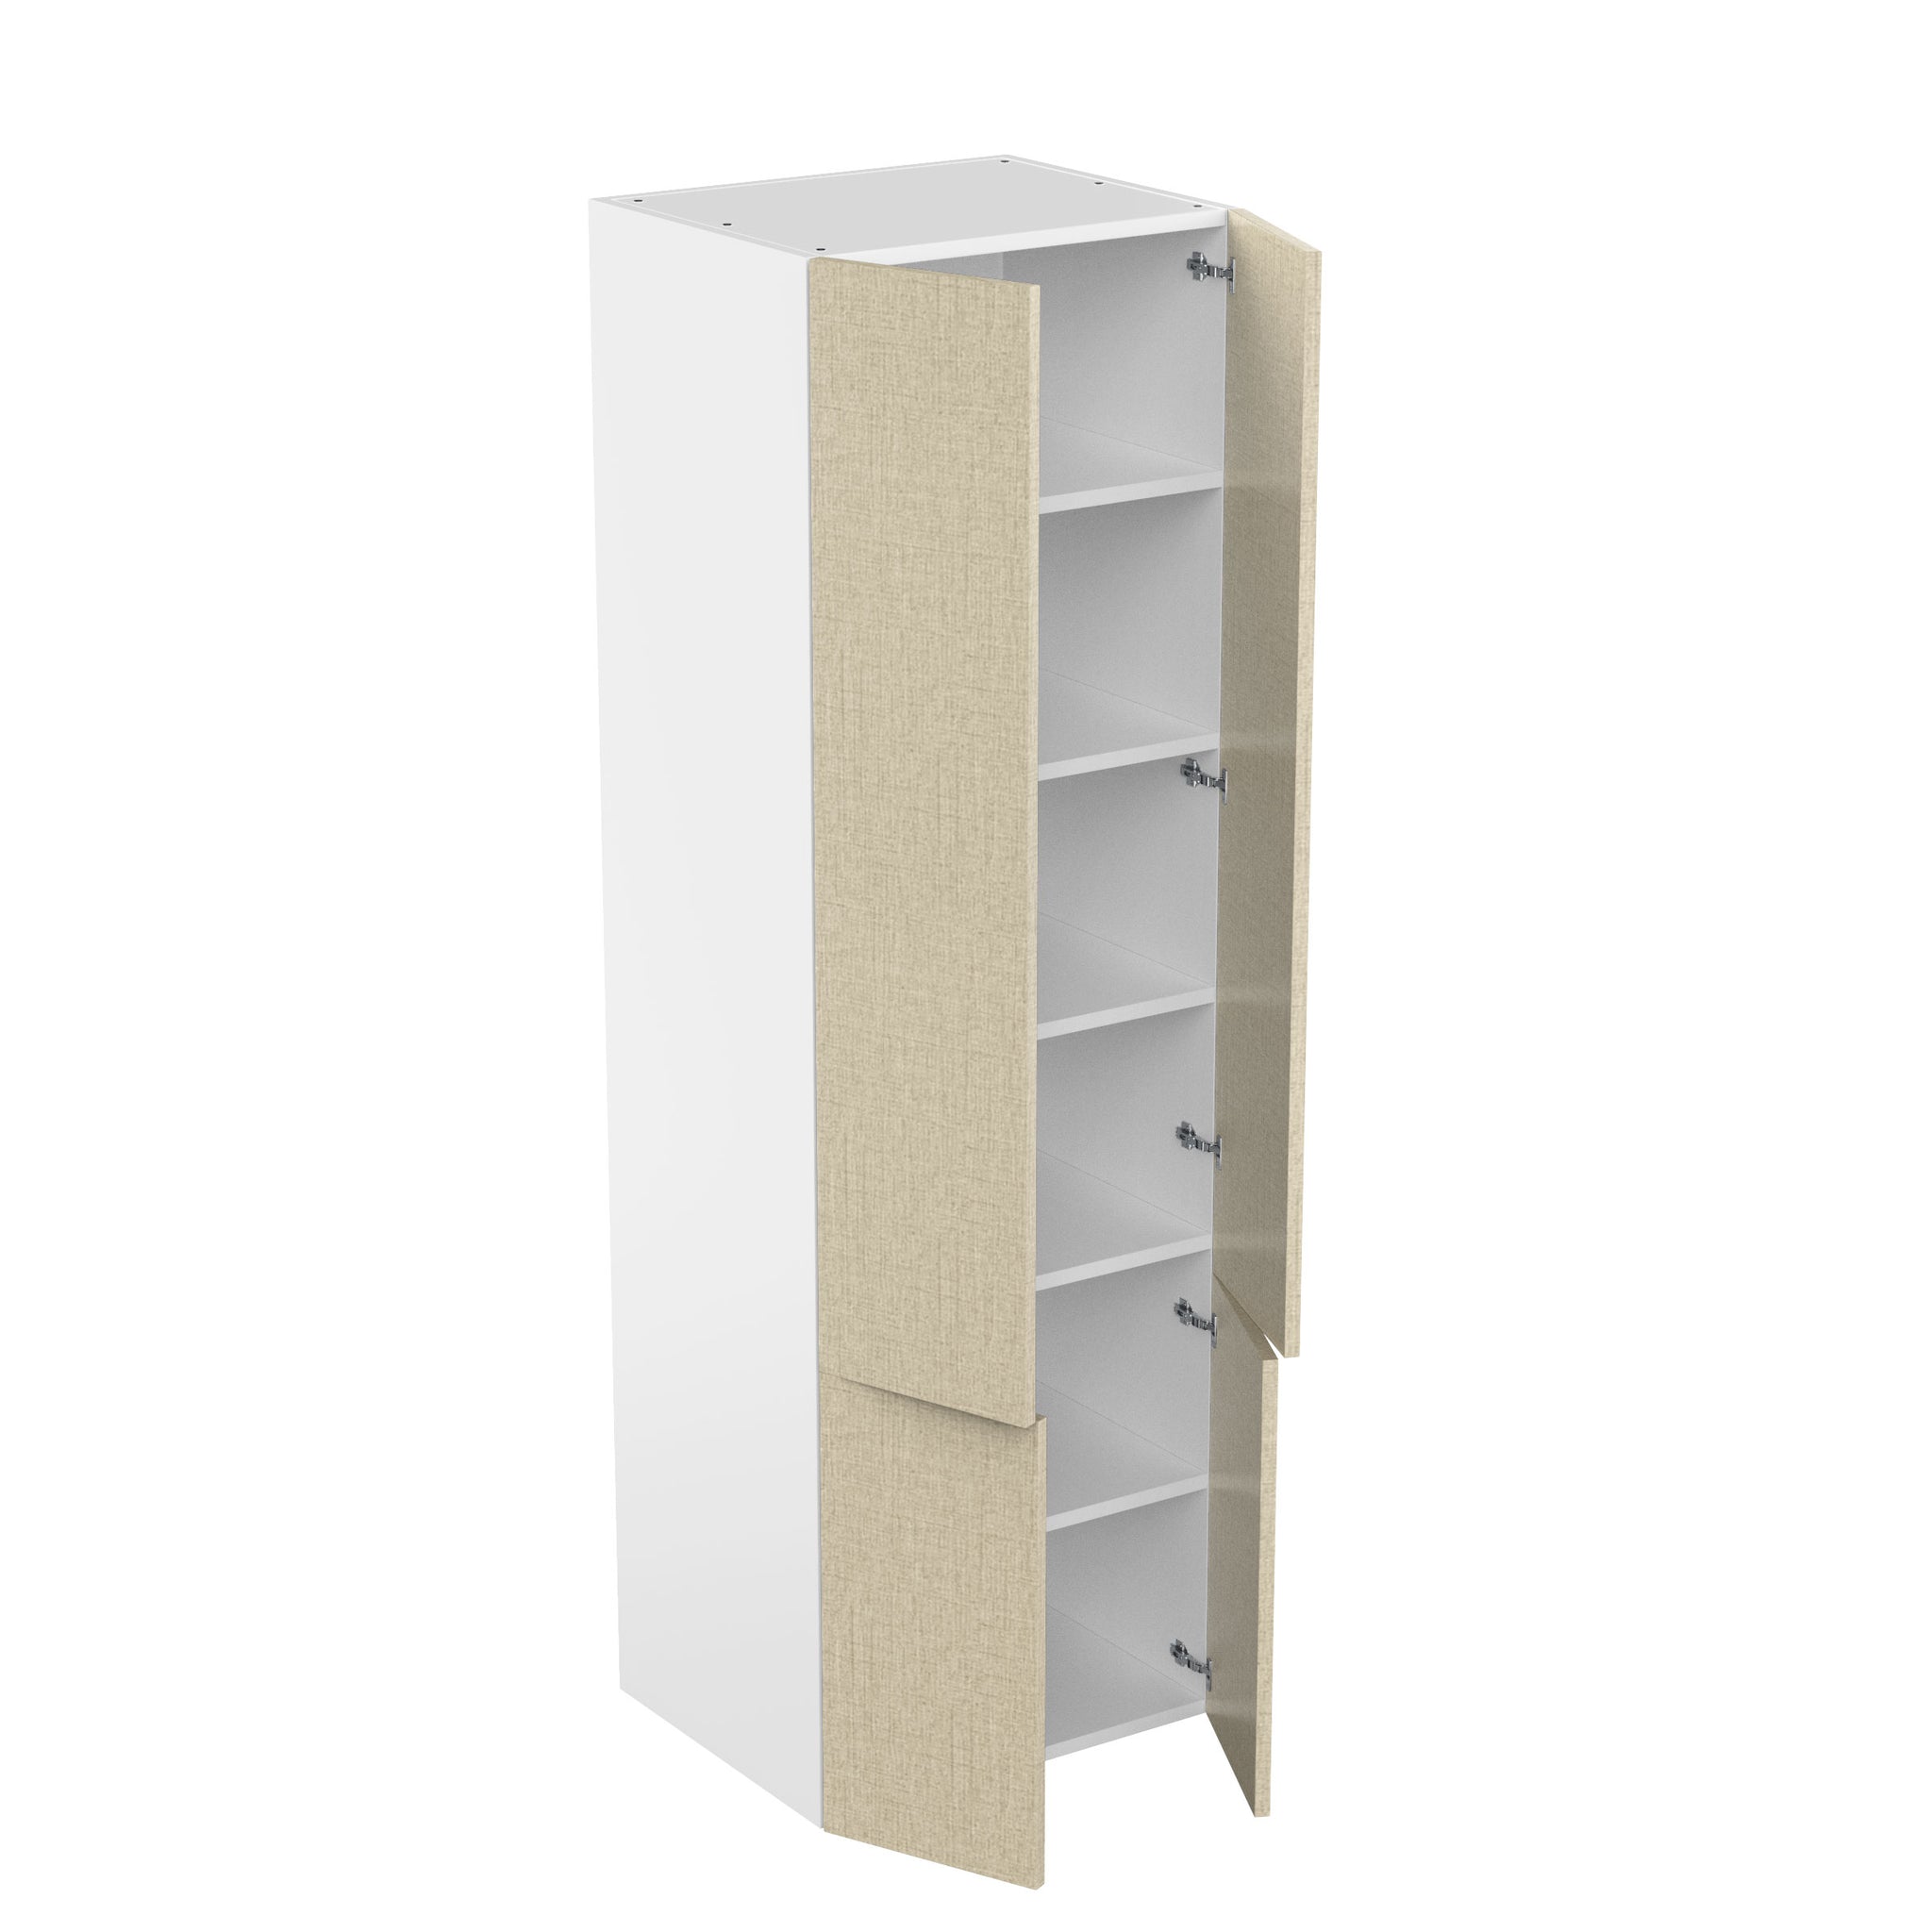 RTA - Fabric Grey - Double Door Tall Cabinets | 30"W x 96"H x 23.8"D